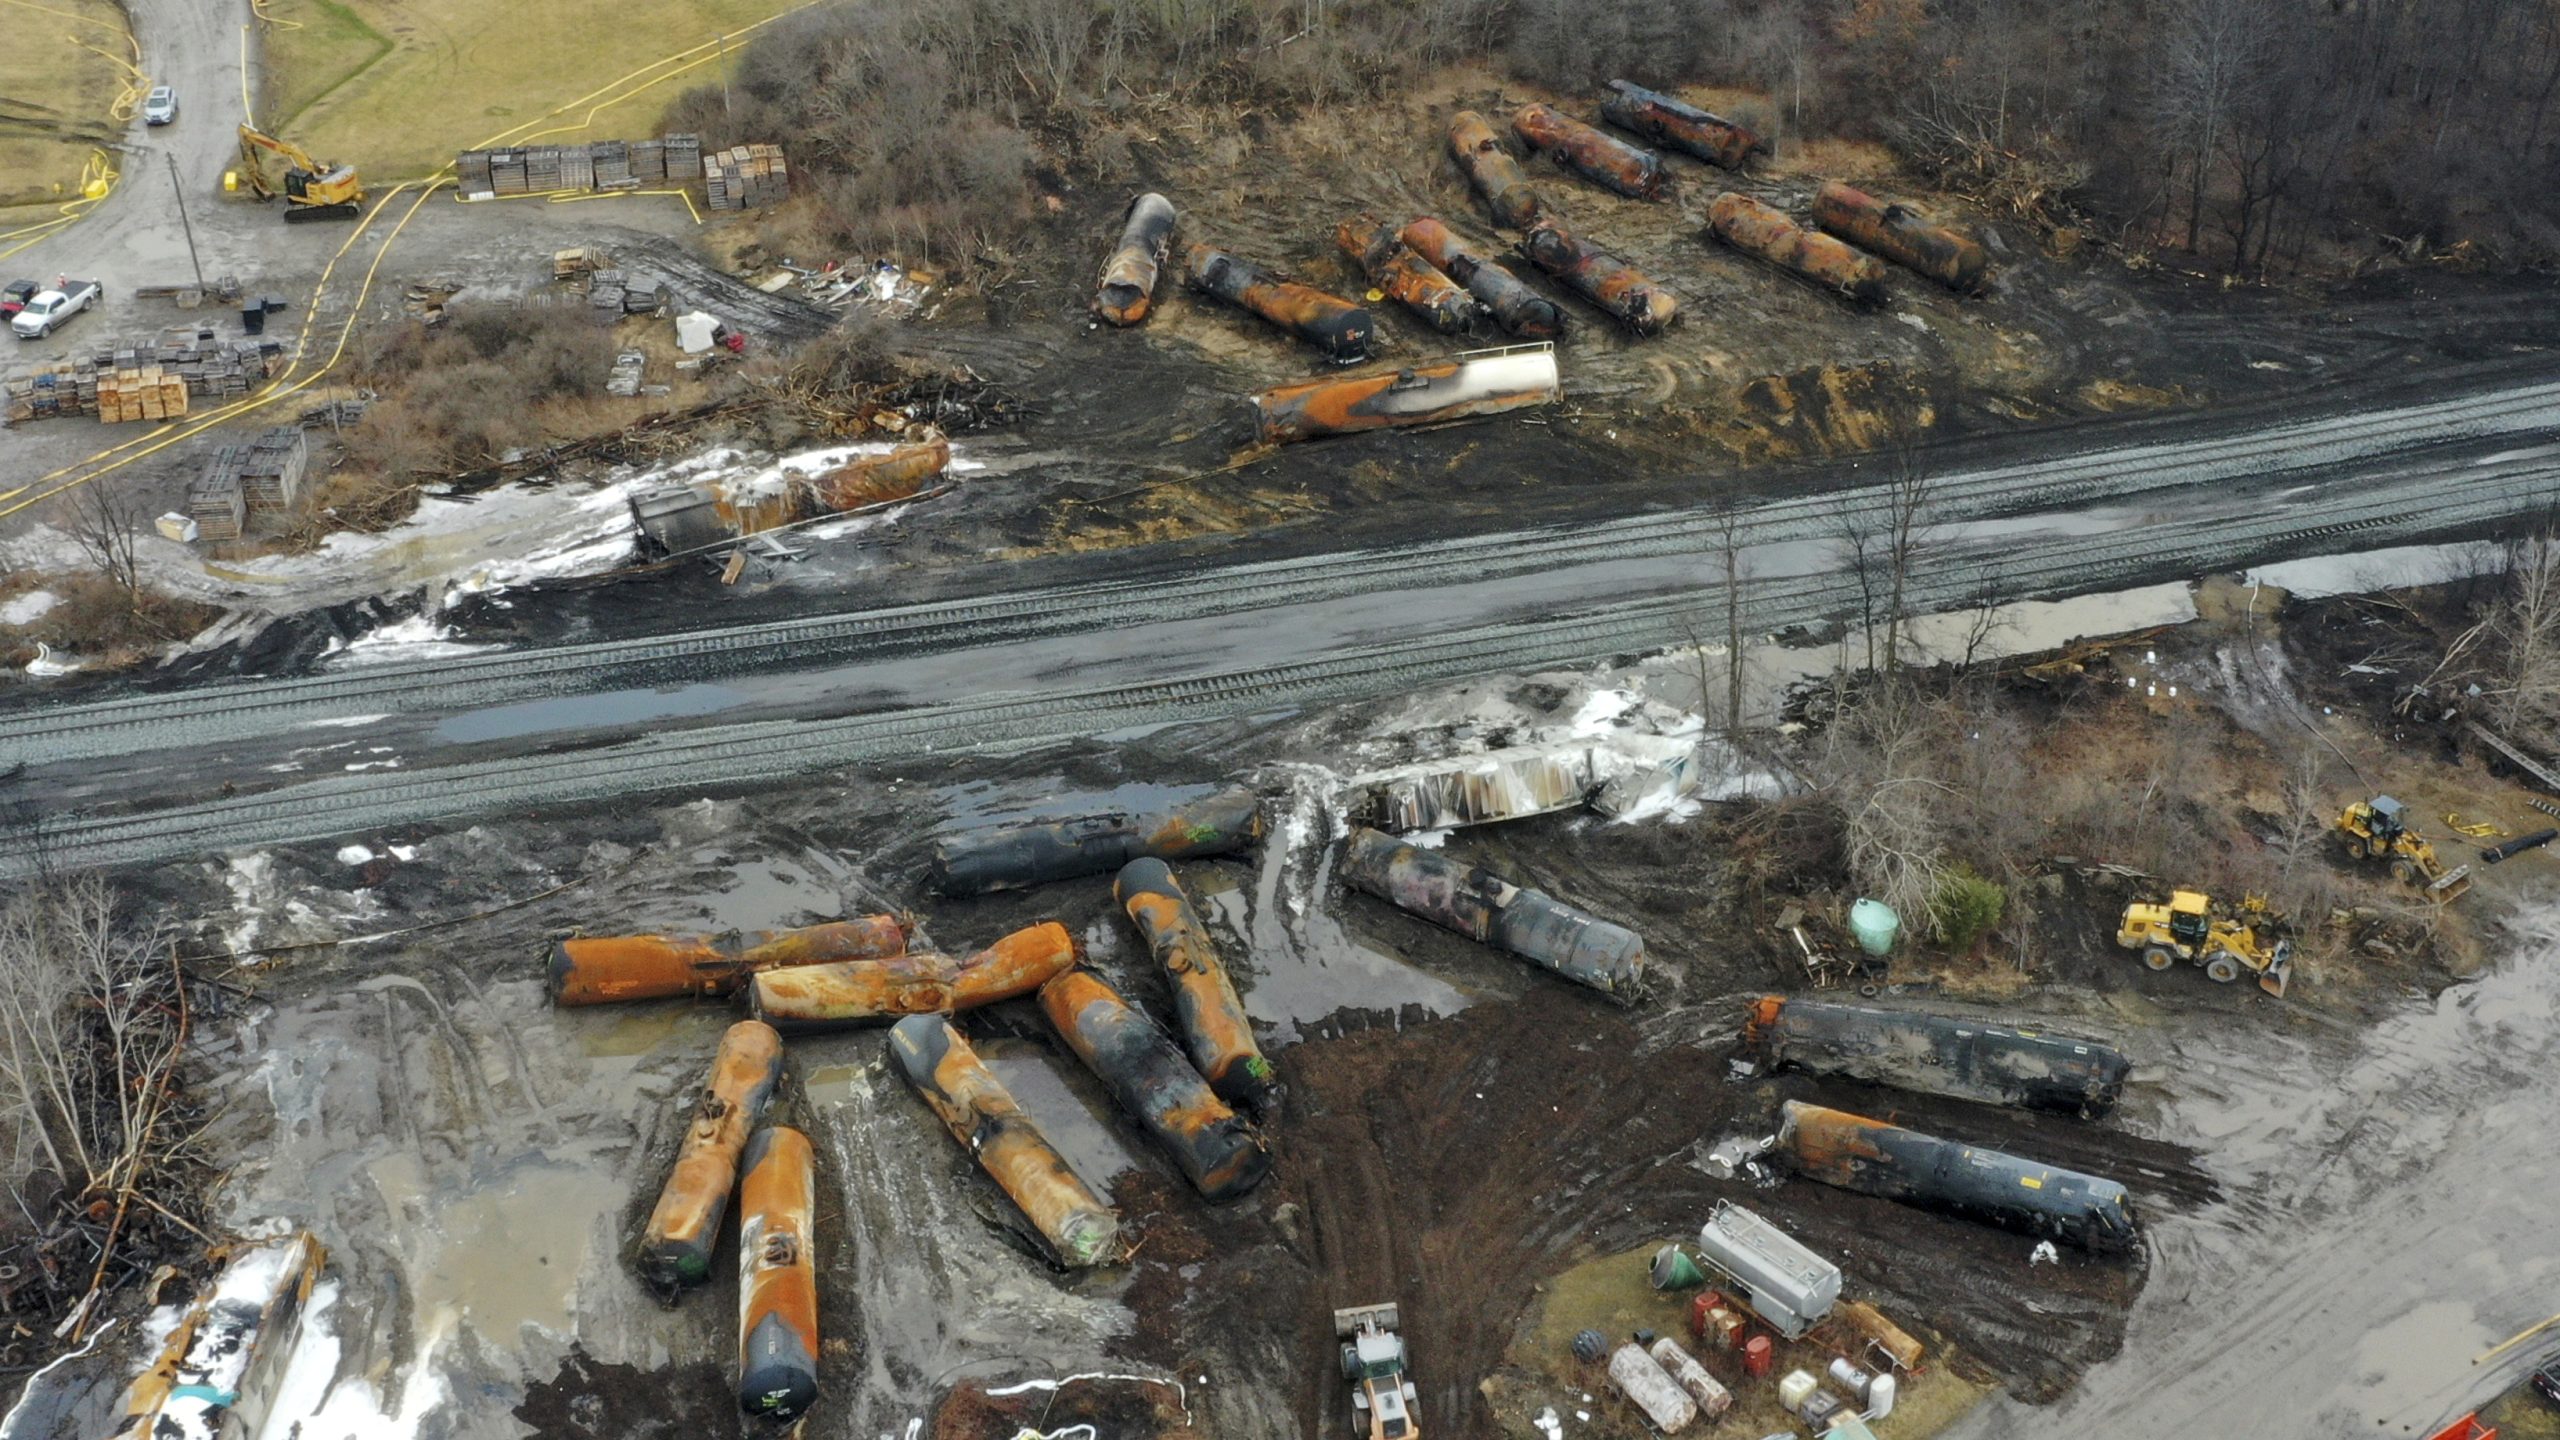 Six months after the Ohio train derailment, Congress is deadlocked on new safety rules